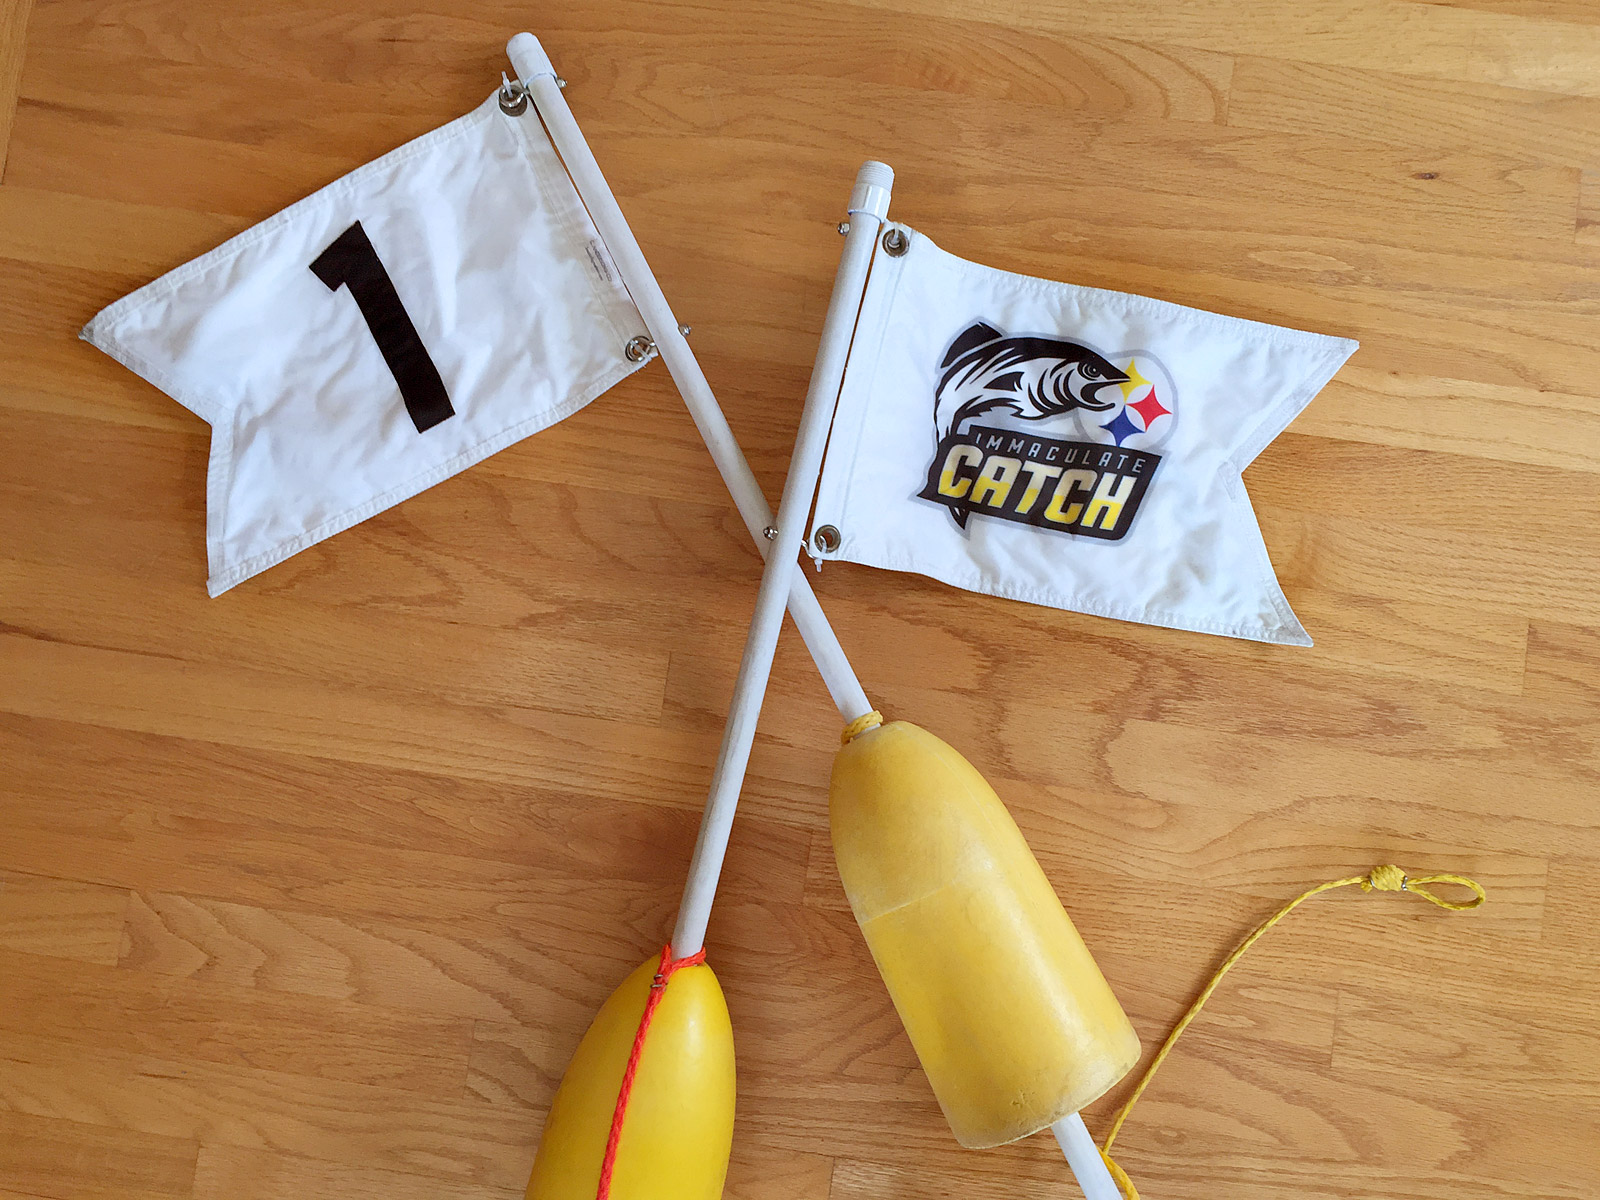 Immaculate Catch buoy flags